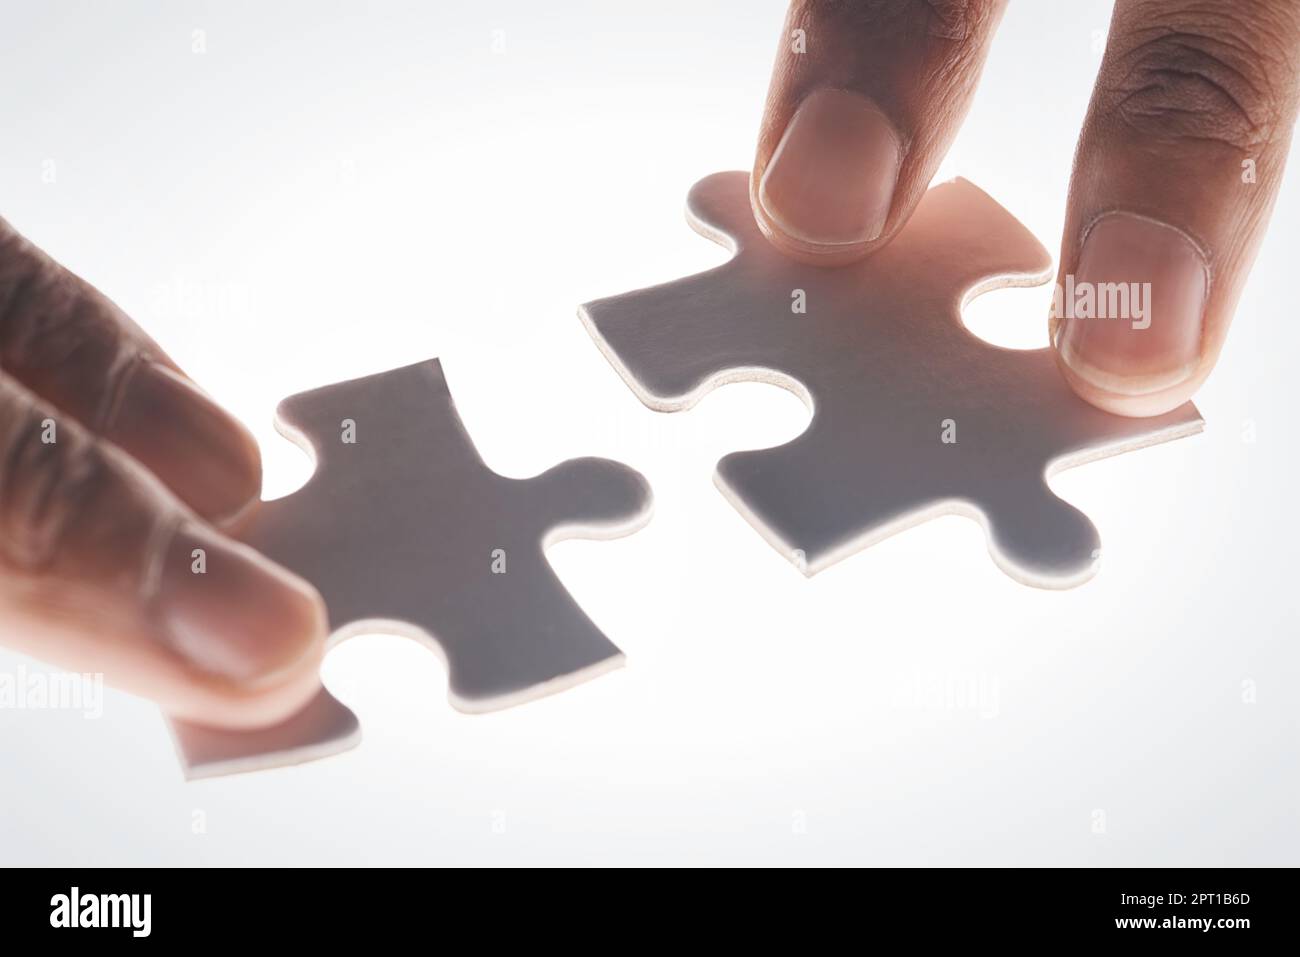 Everything is falling into place. hands holding two puzzle pieces Stock Photo